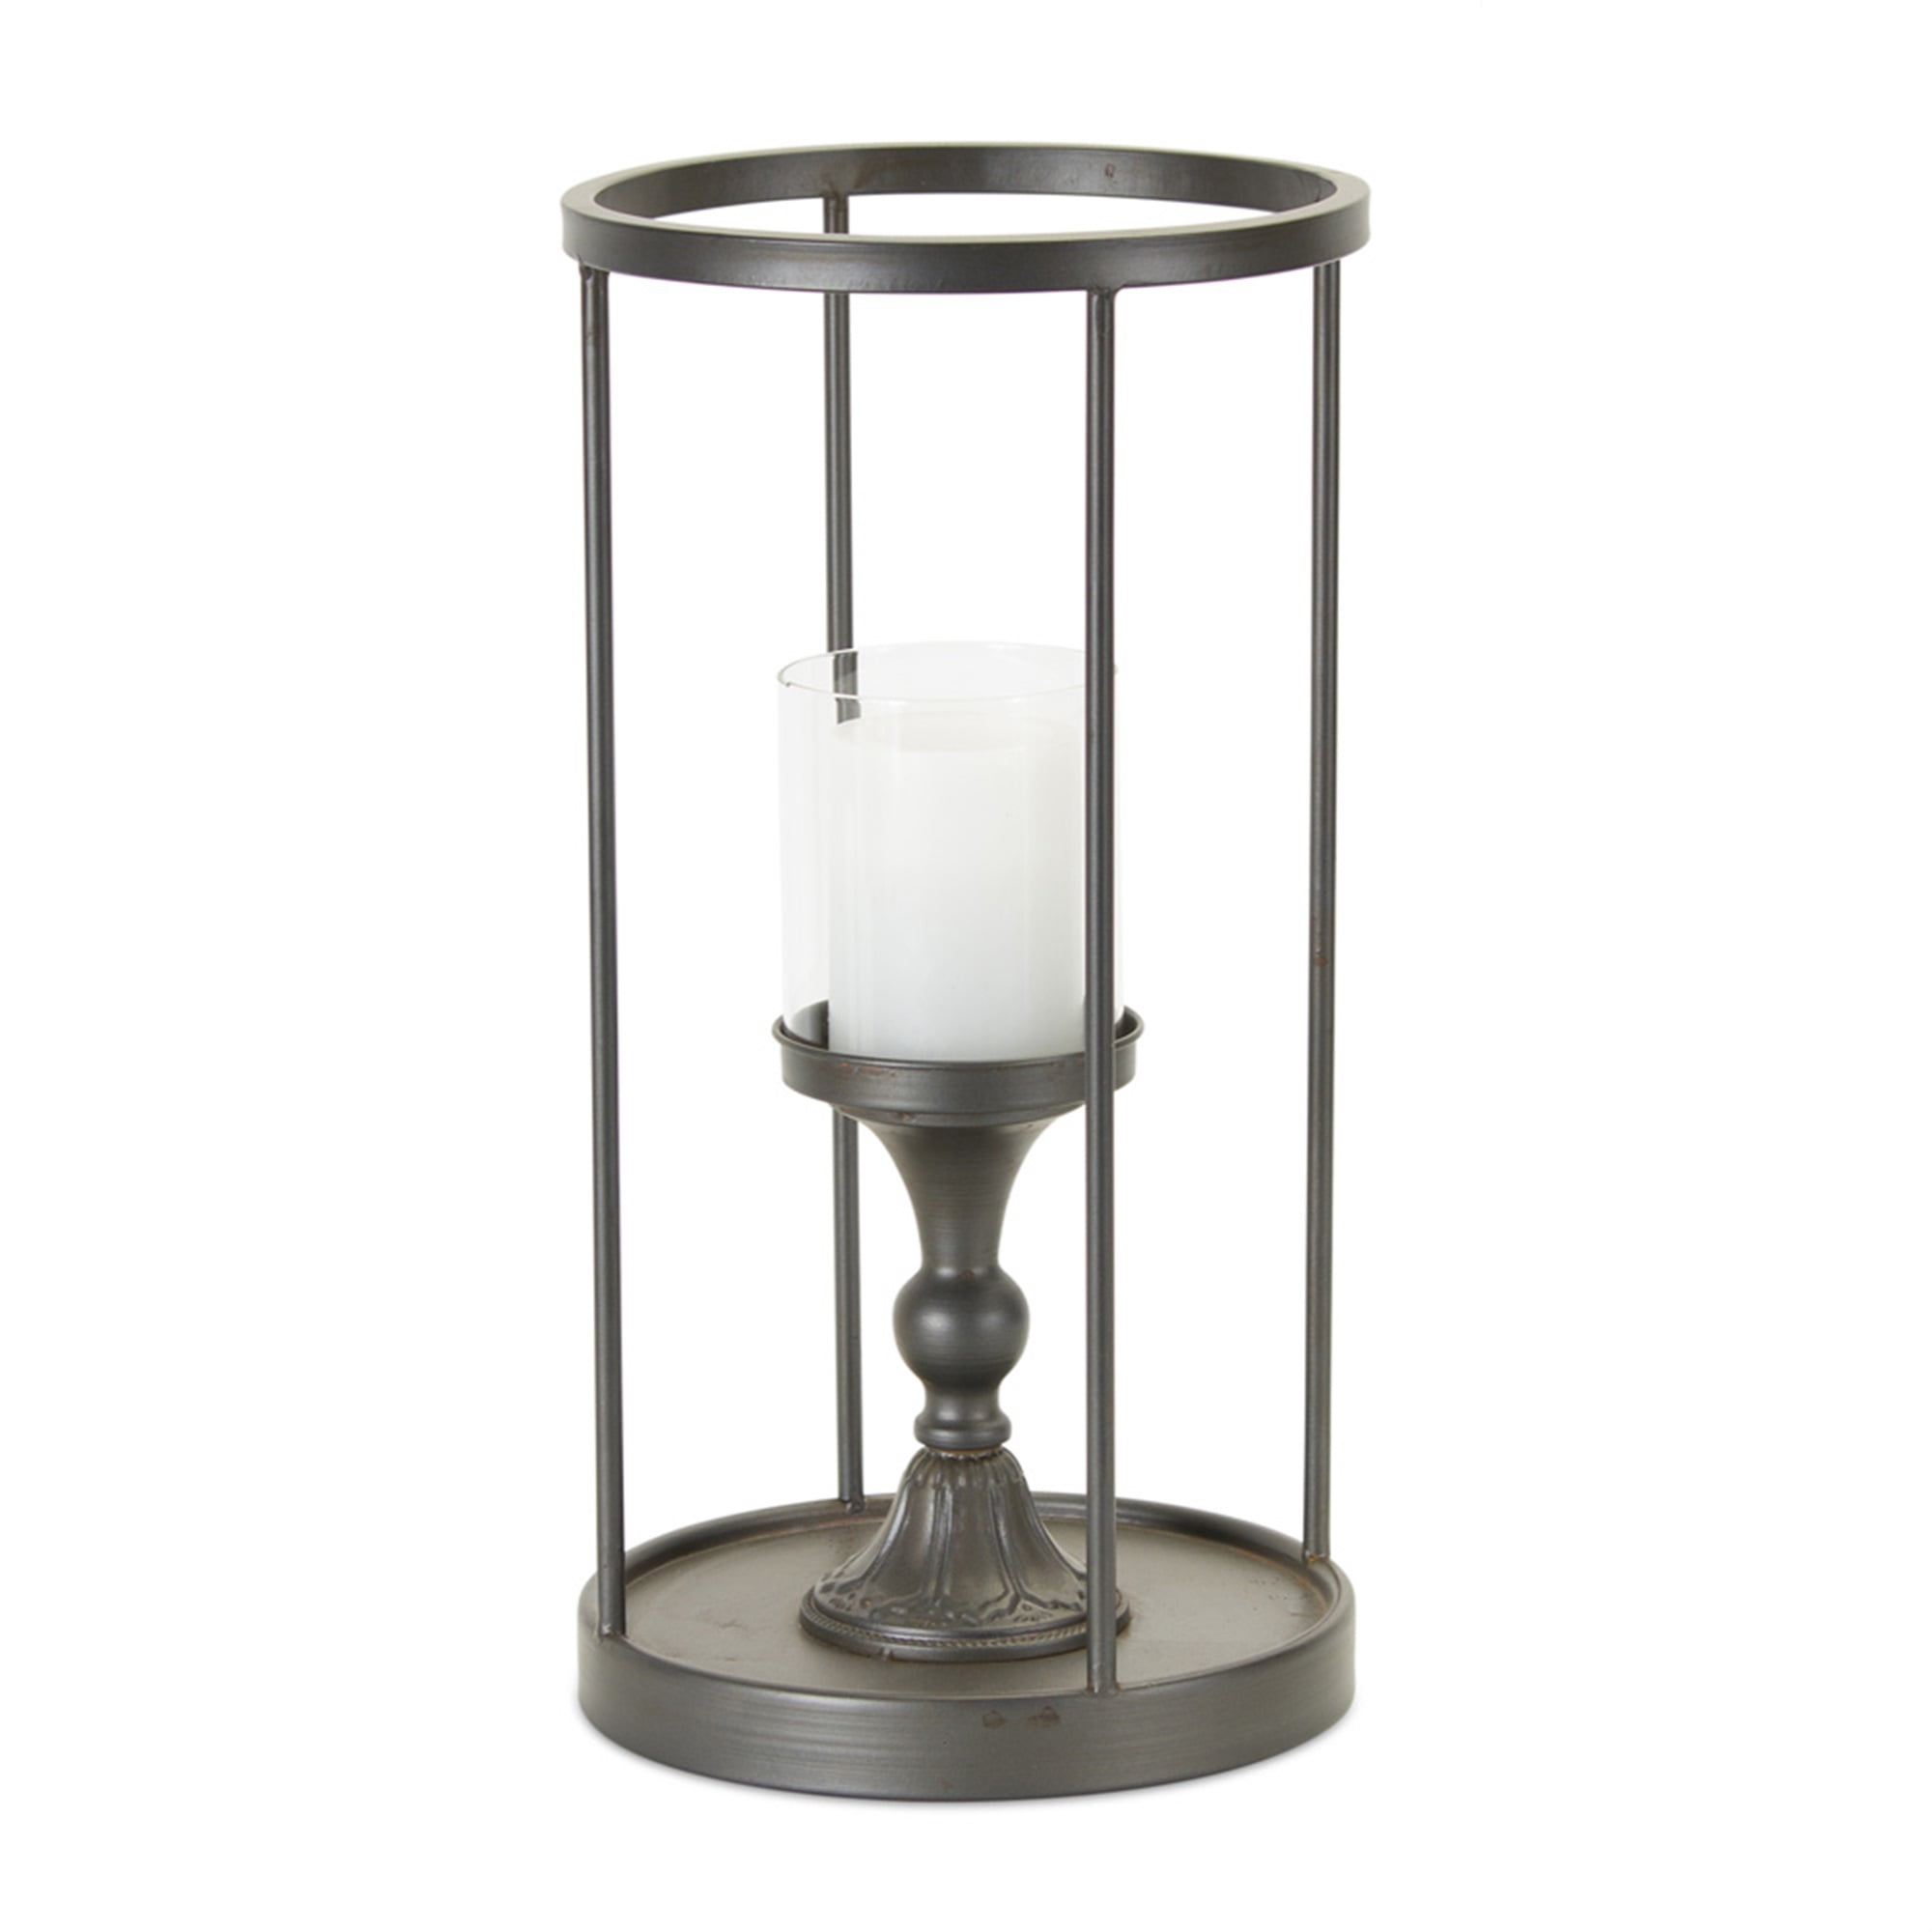 Candle Holder 9.25"D x 17.75"H Iron/Glass